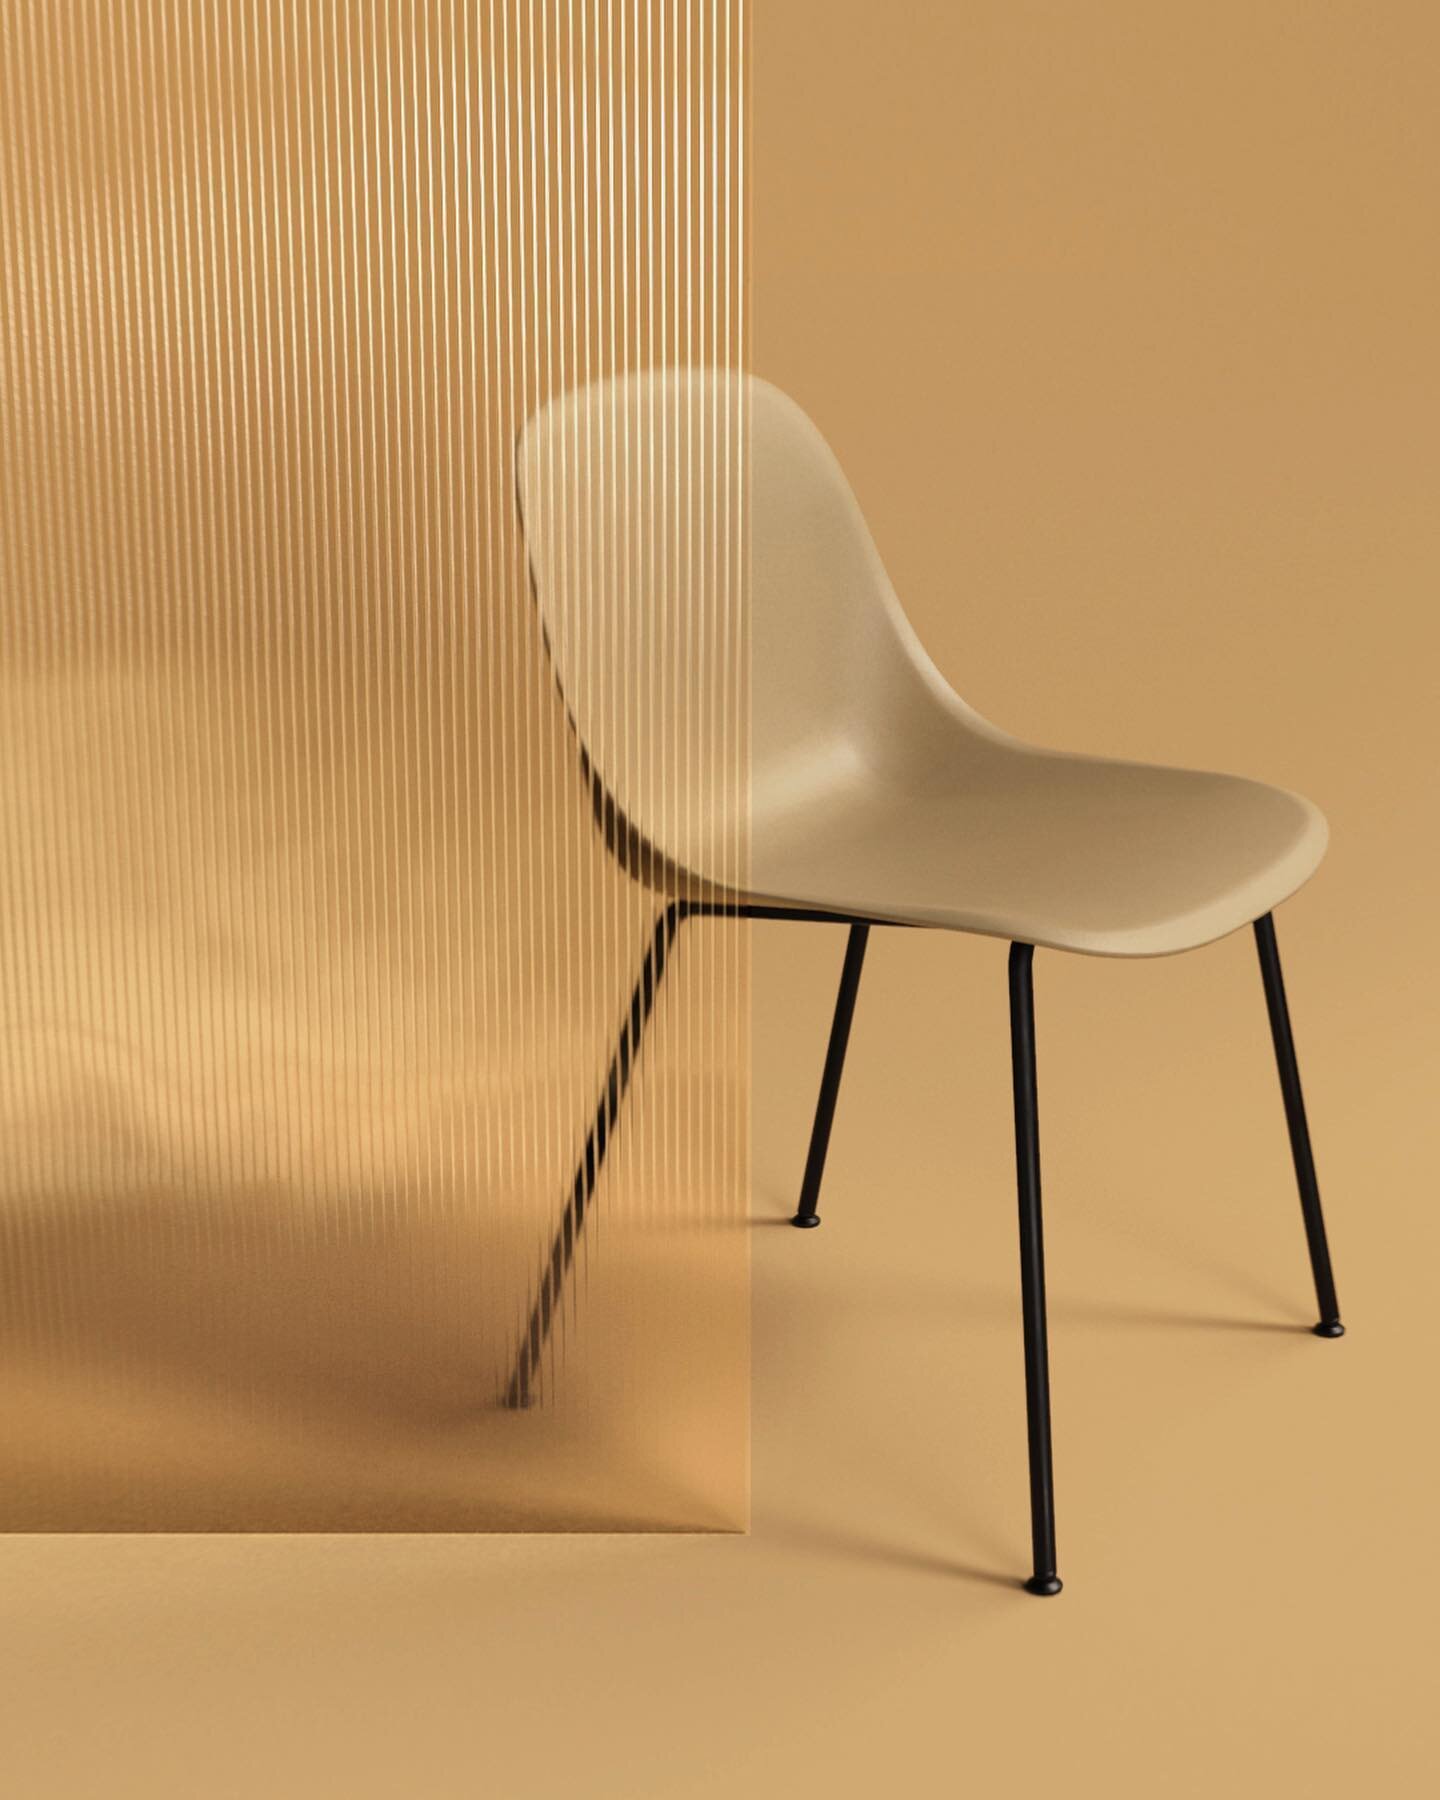 Render Studies: Muuto Fiber Side Chair

Documenting the exploration of rendering techniques to recreate product imagery. 

Model and reference image courtesy of Muuto.com
Design by Iskos-Berlin

#industrialdesign #id #product #design #3d #model #keys